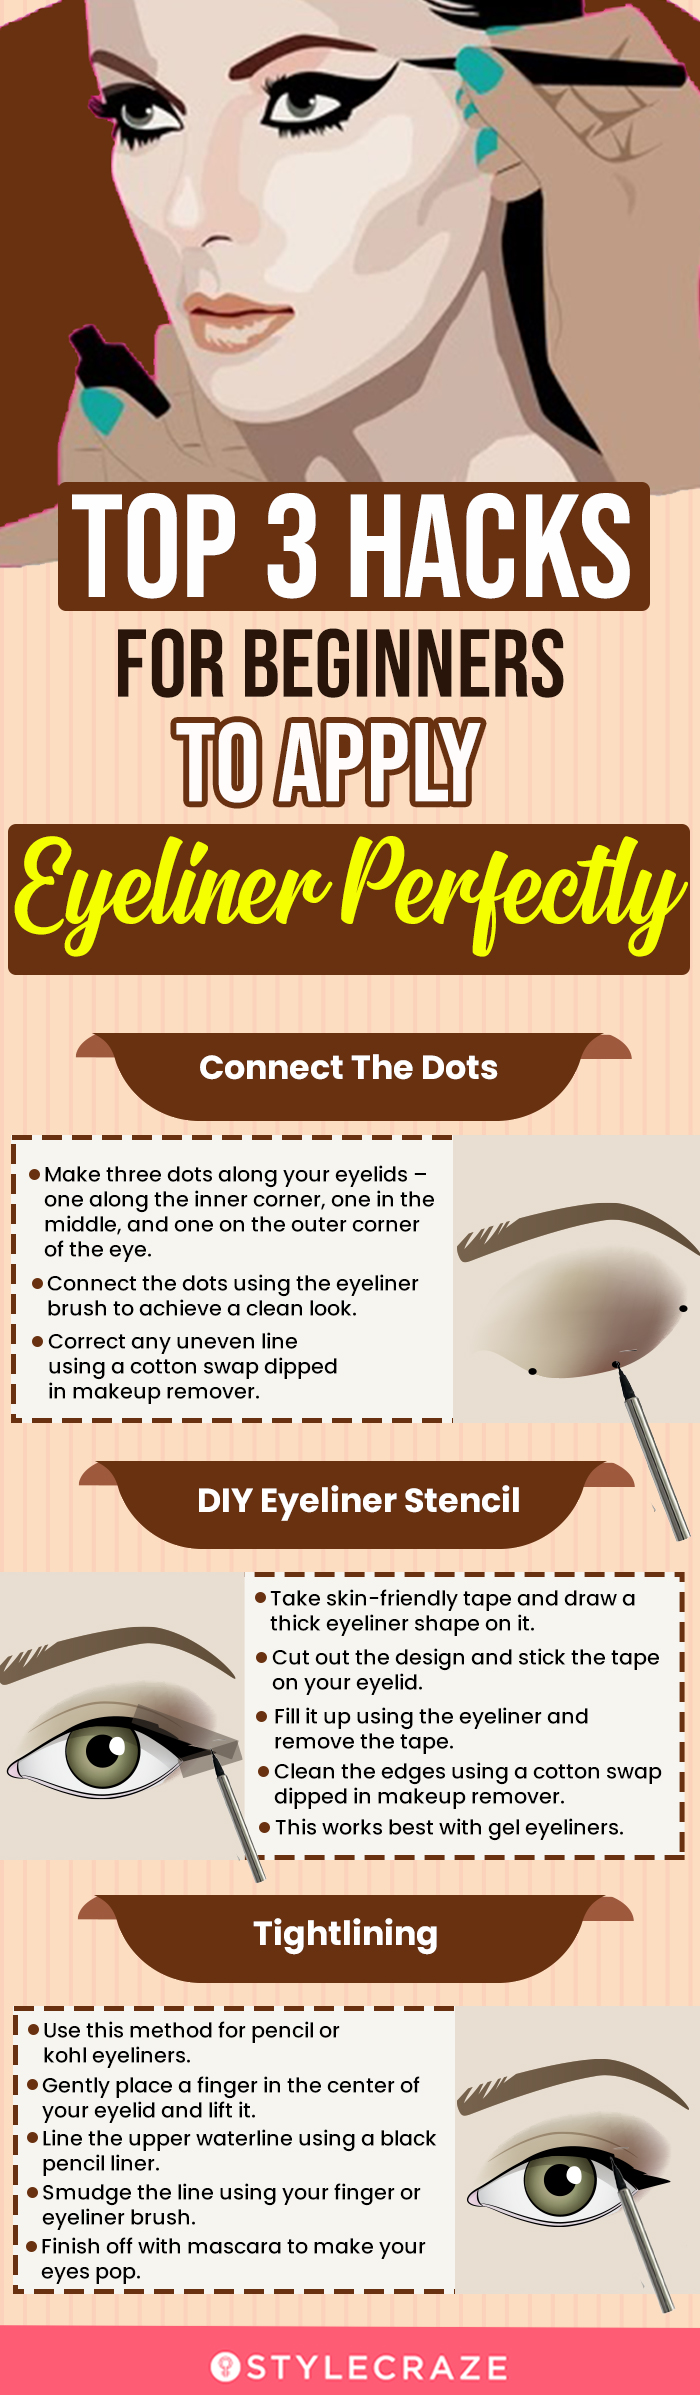 Top 3 Hacks For Beginners To Apply Eyeliner Perfectly (infographic)